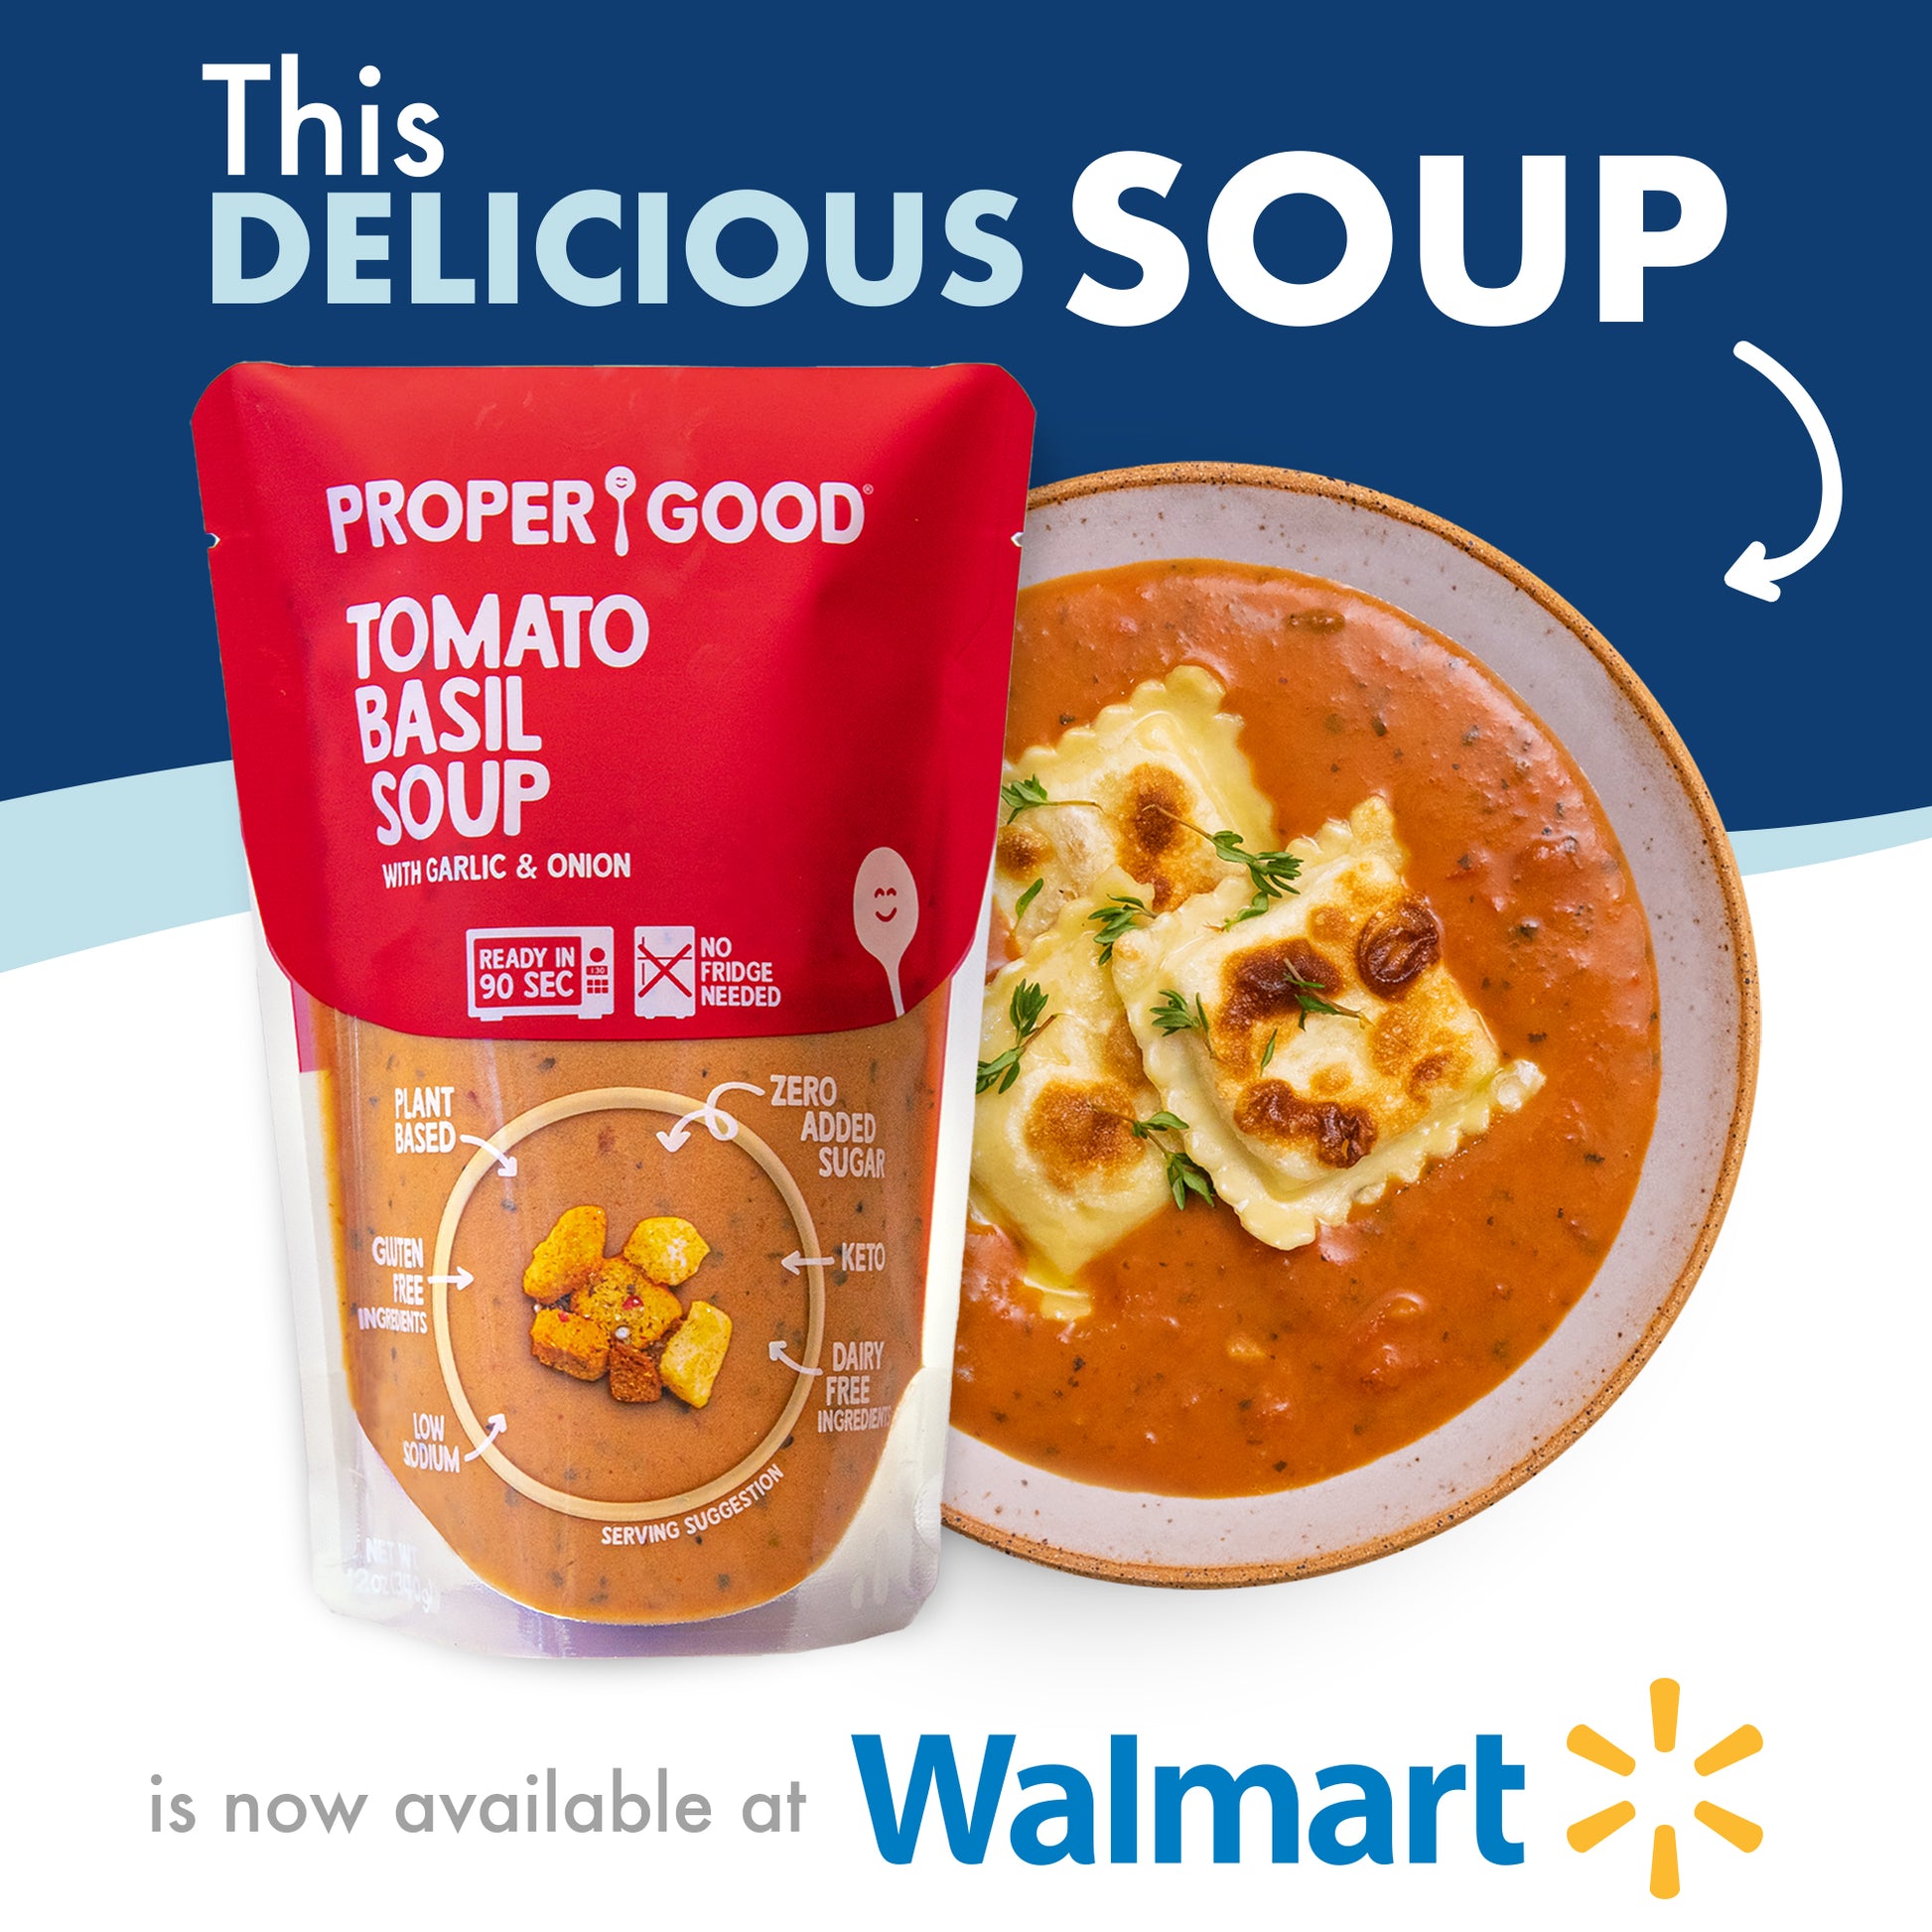 Tomato Basil Soup available in Walmart - Eat Proper Good